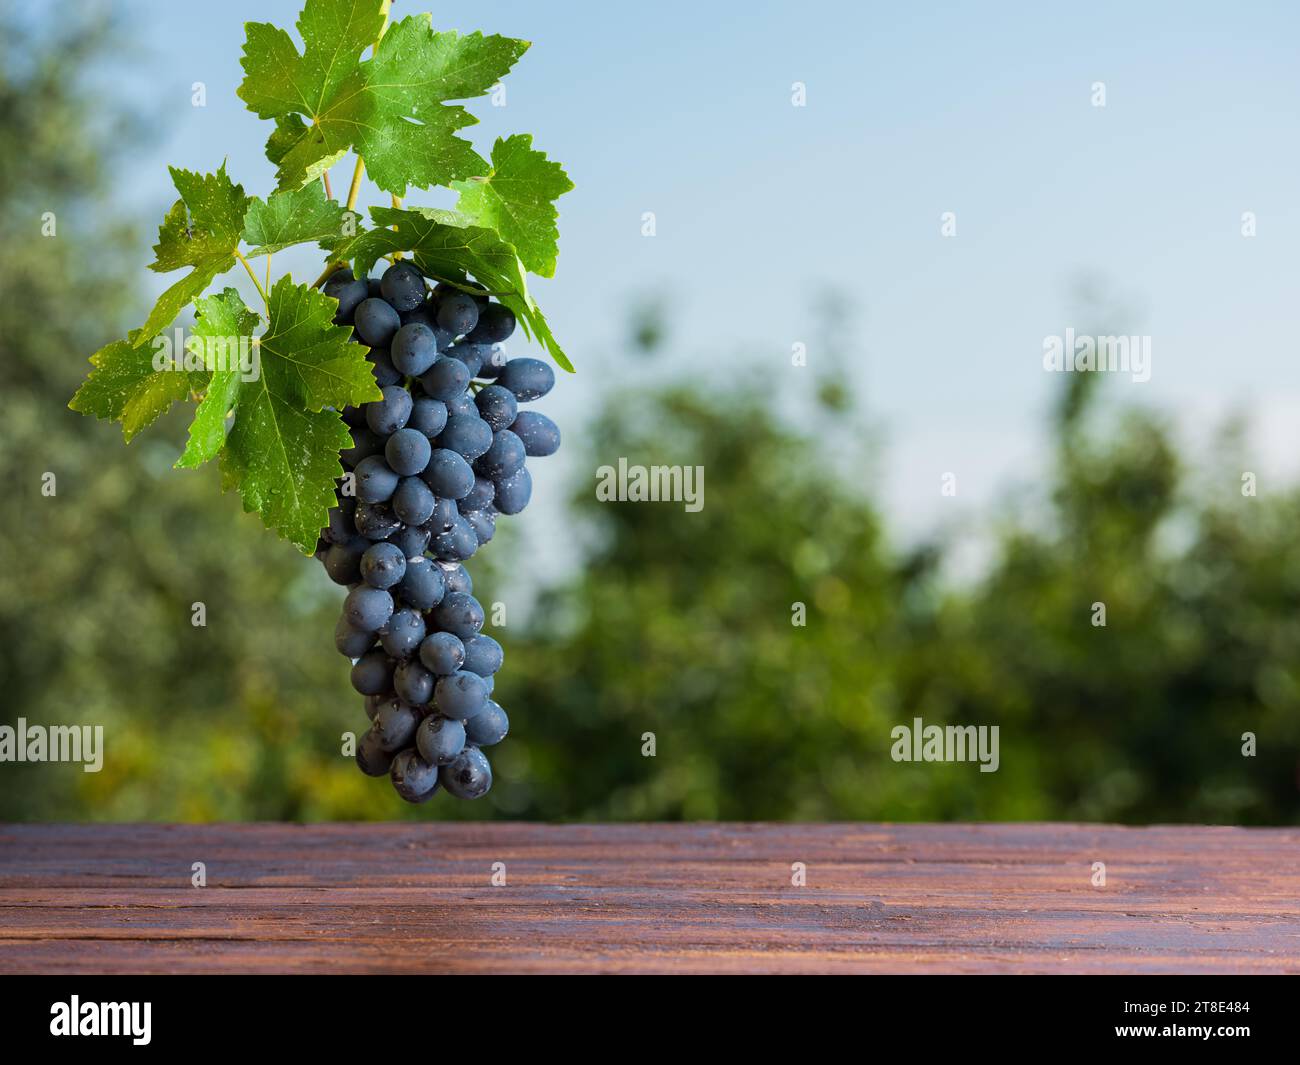 Fresh black grapes hanging over the garden table. Autumn fruits. Background for food and beverage product presentation Stock Photo